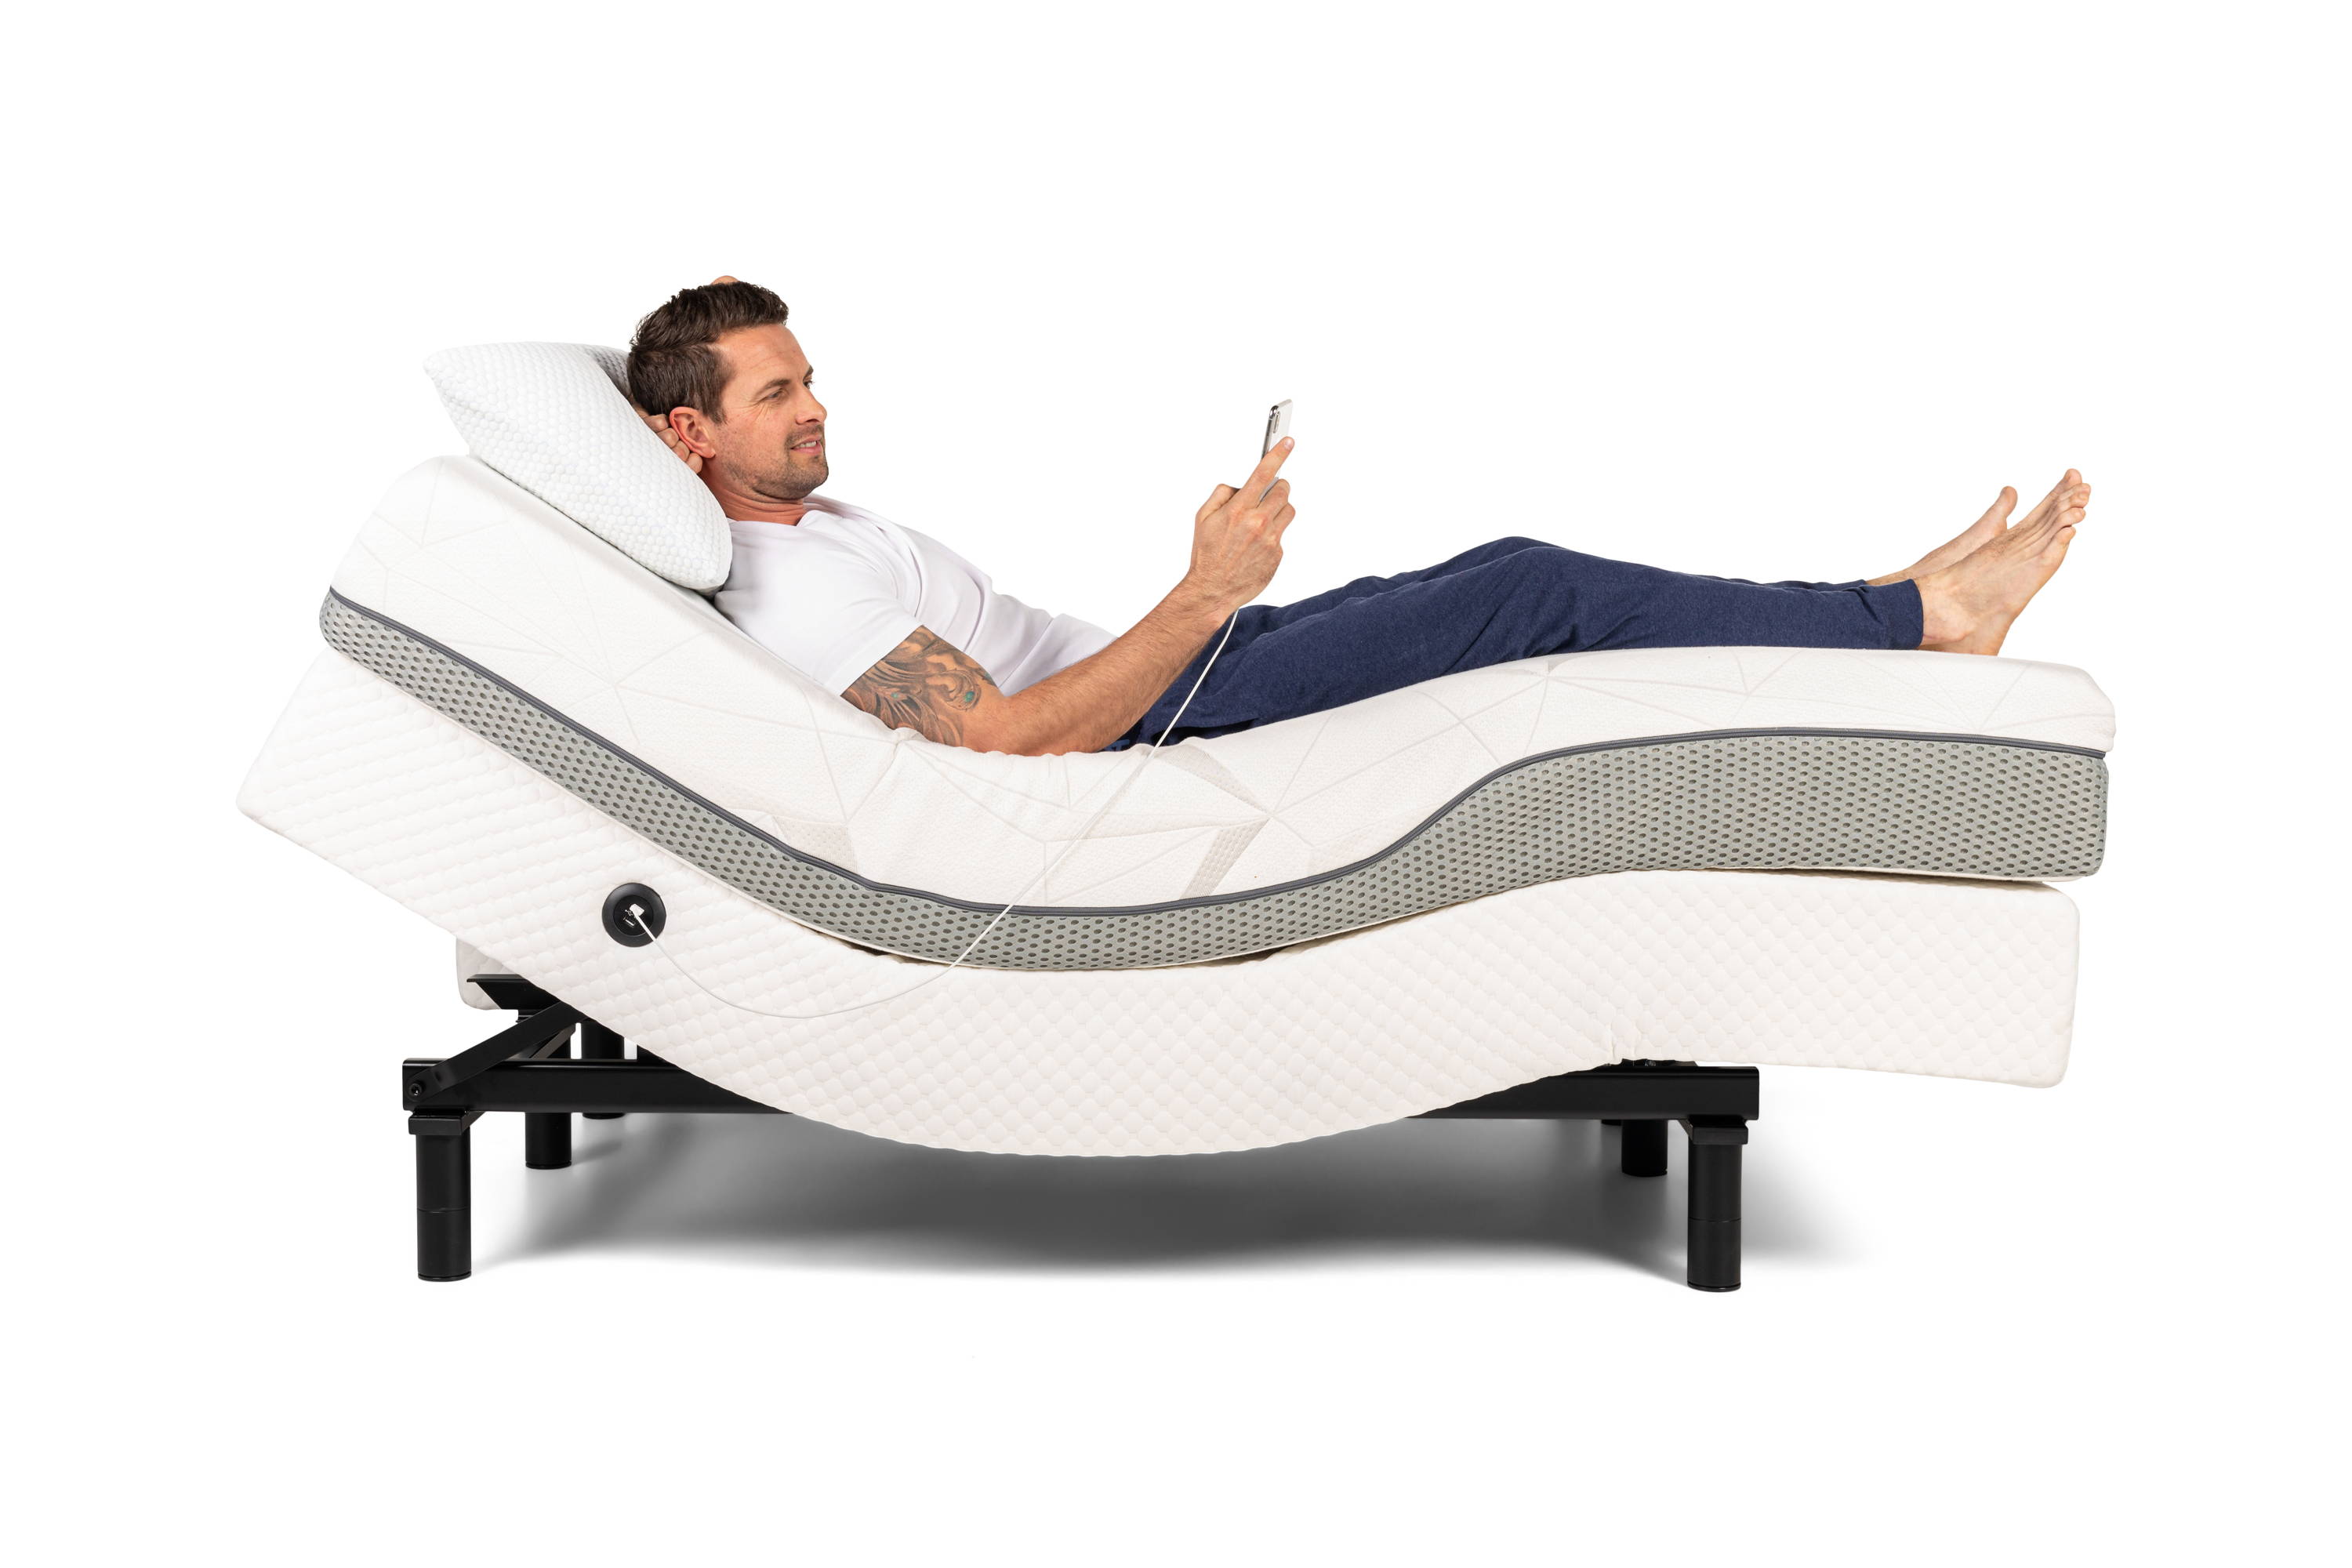 Man lying in adjustable bed